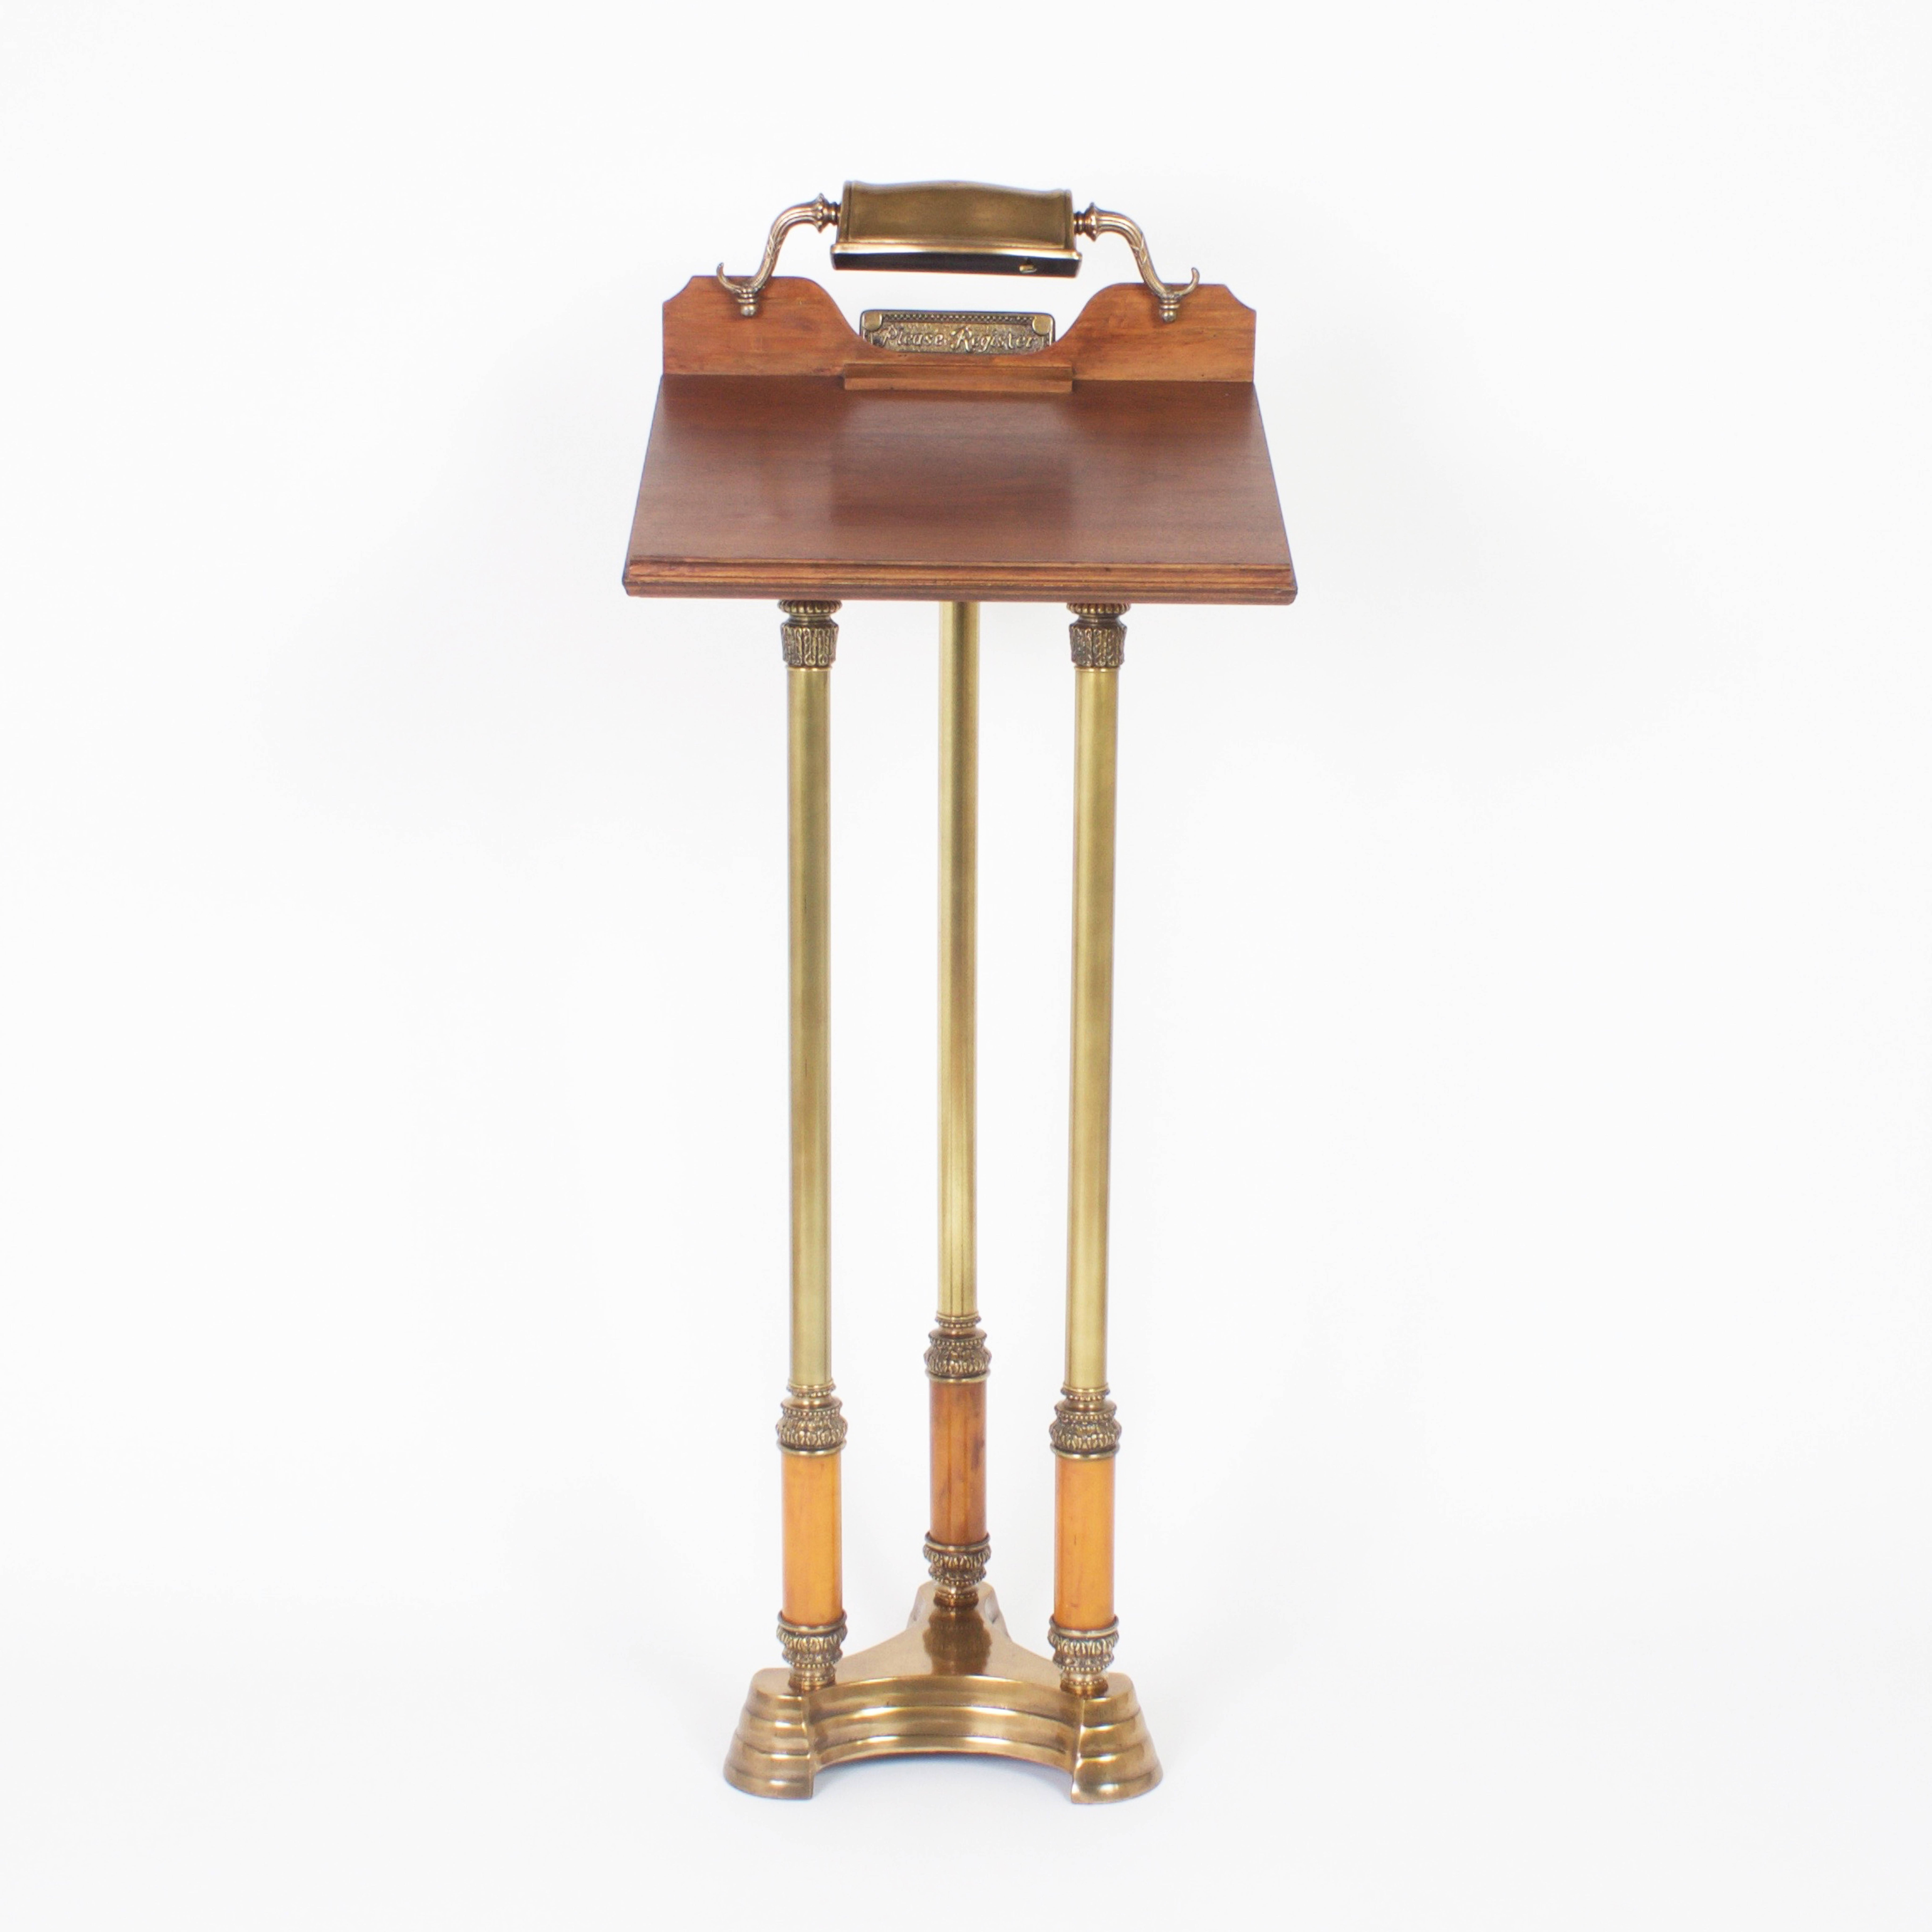 English mahogany and brass podium or lecturn, in the Art Deco manner, with plenty of pizzazz. The writing surface is mahogany with a matching pencil tray. This book stand has a brass plaque asking us to please register lit by a brass desk lamp. The